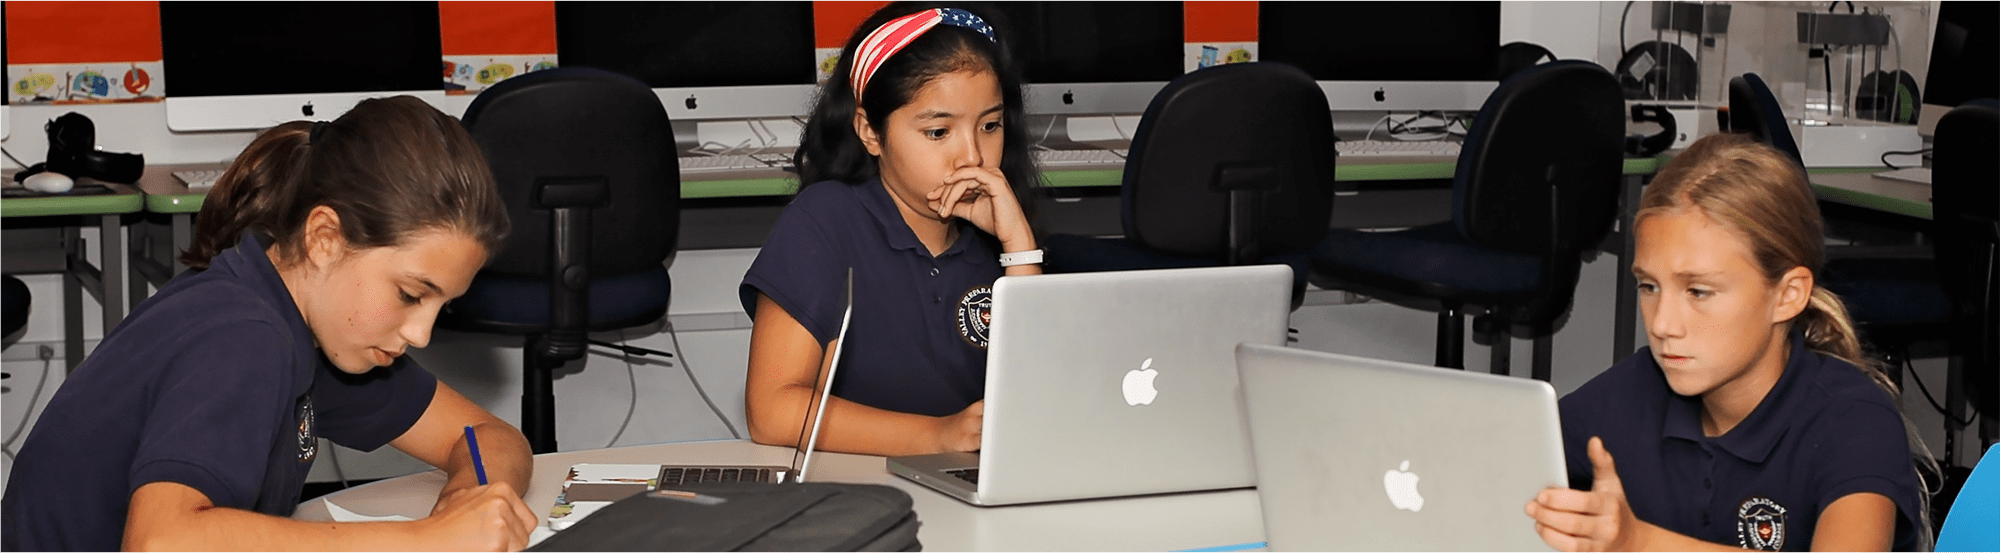 Female students use laptops in class